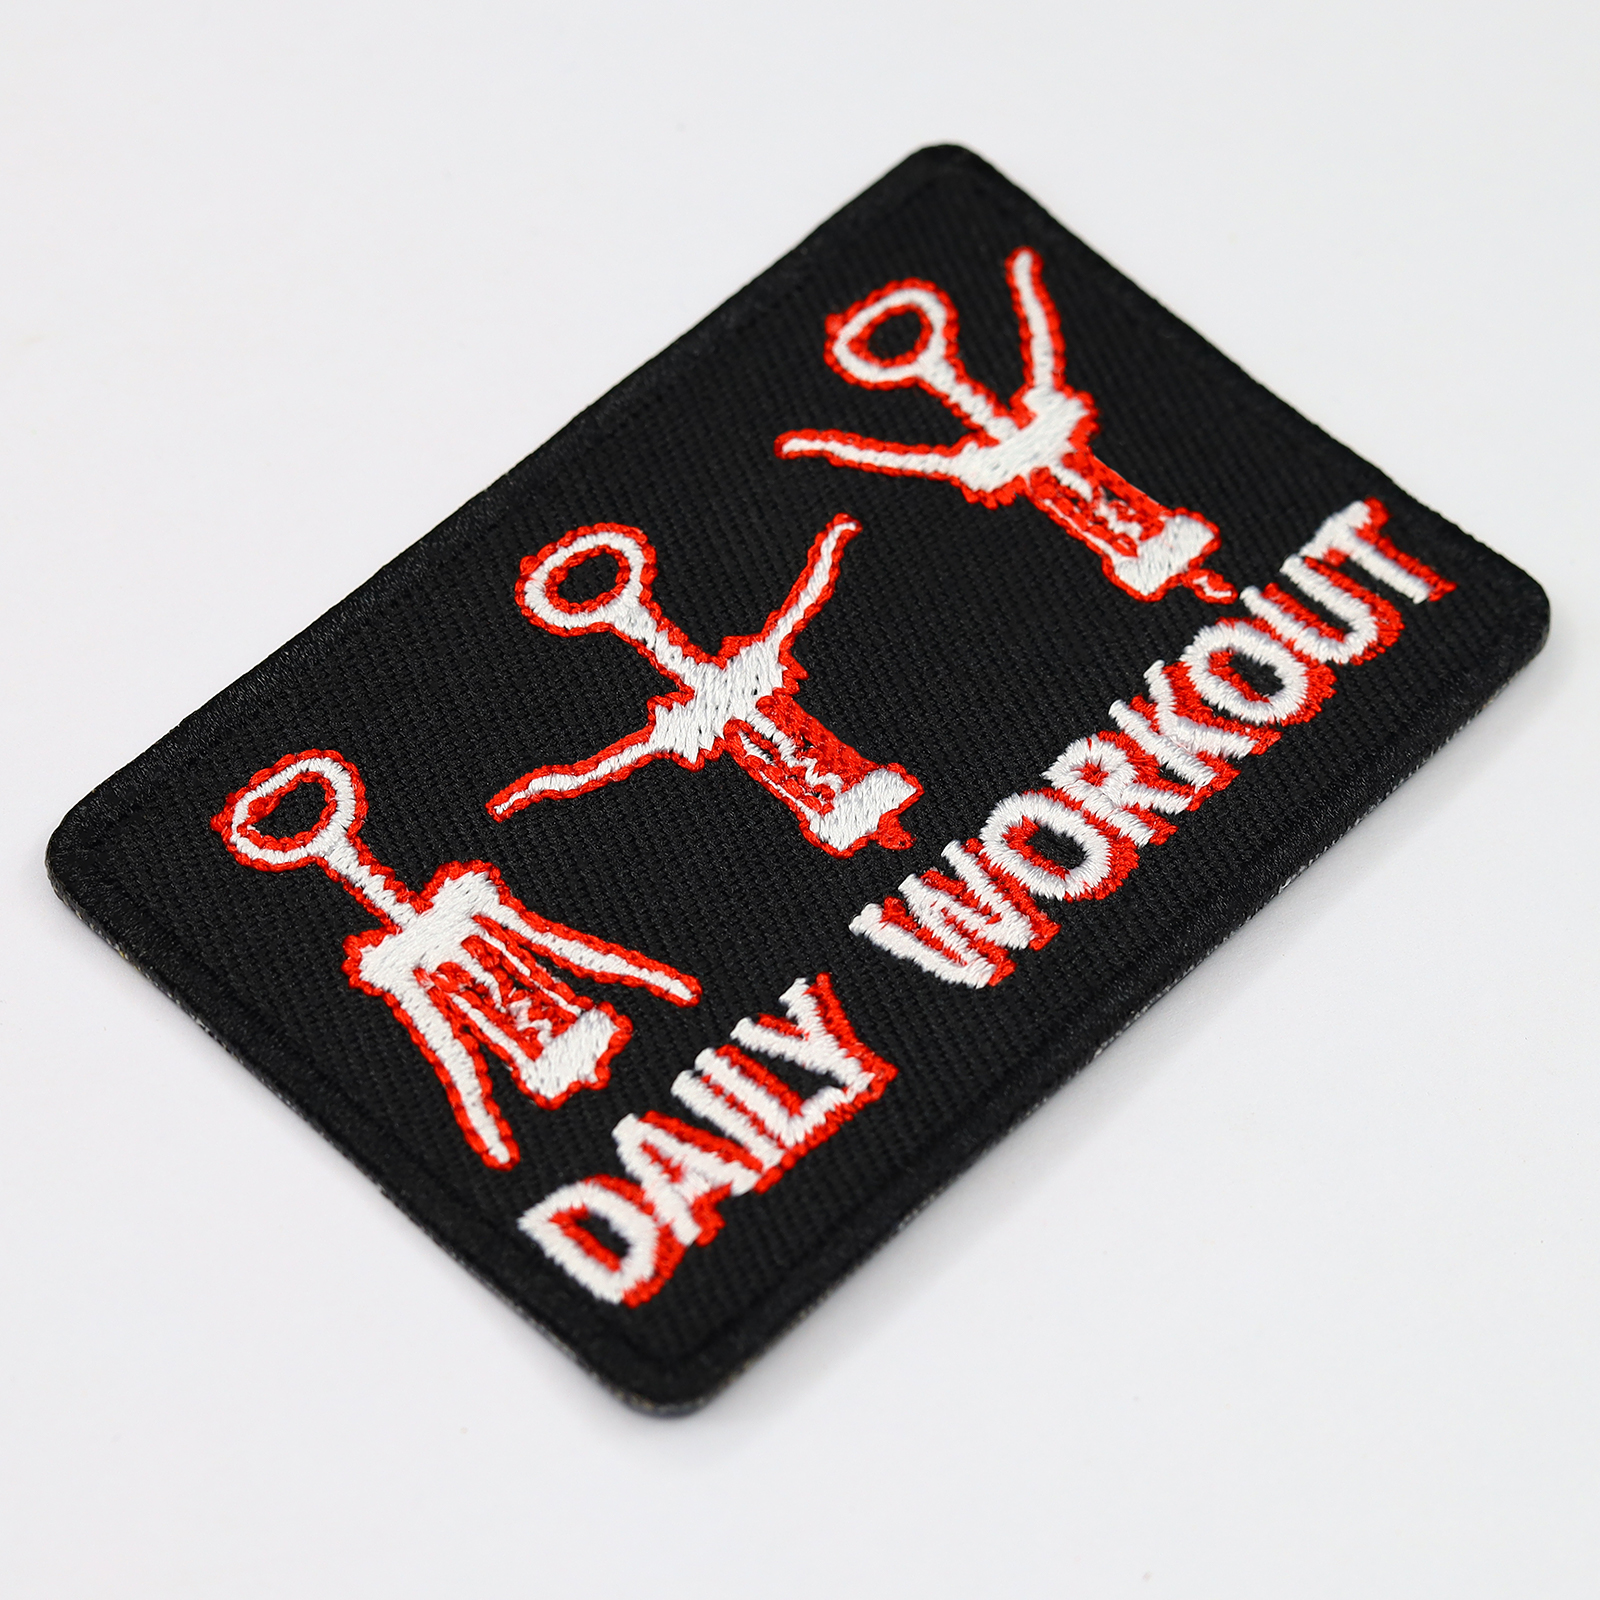 Daily workout - Patch